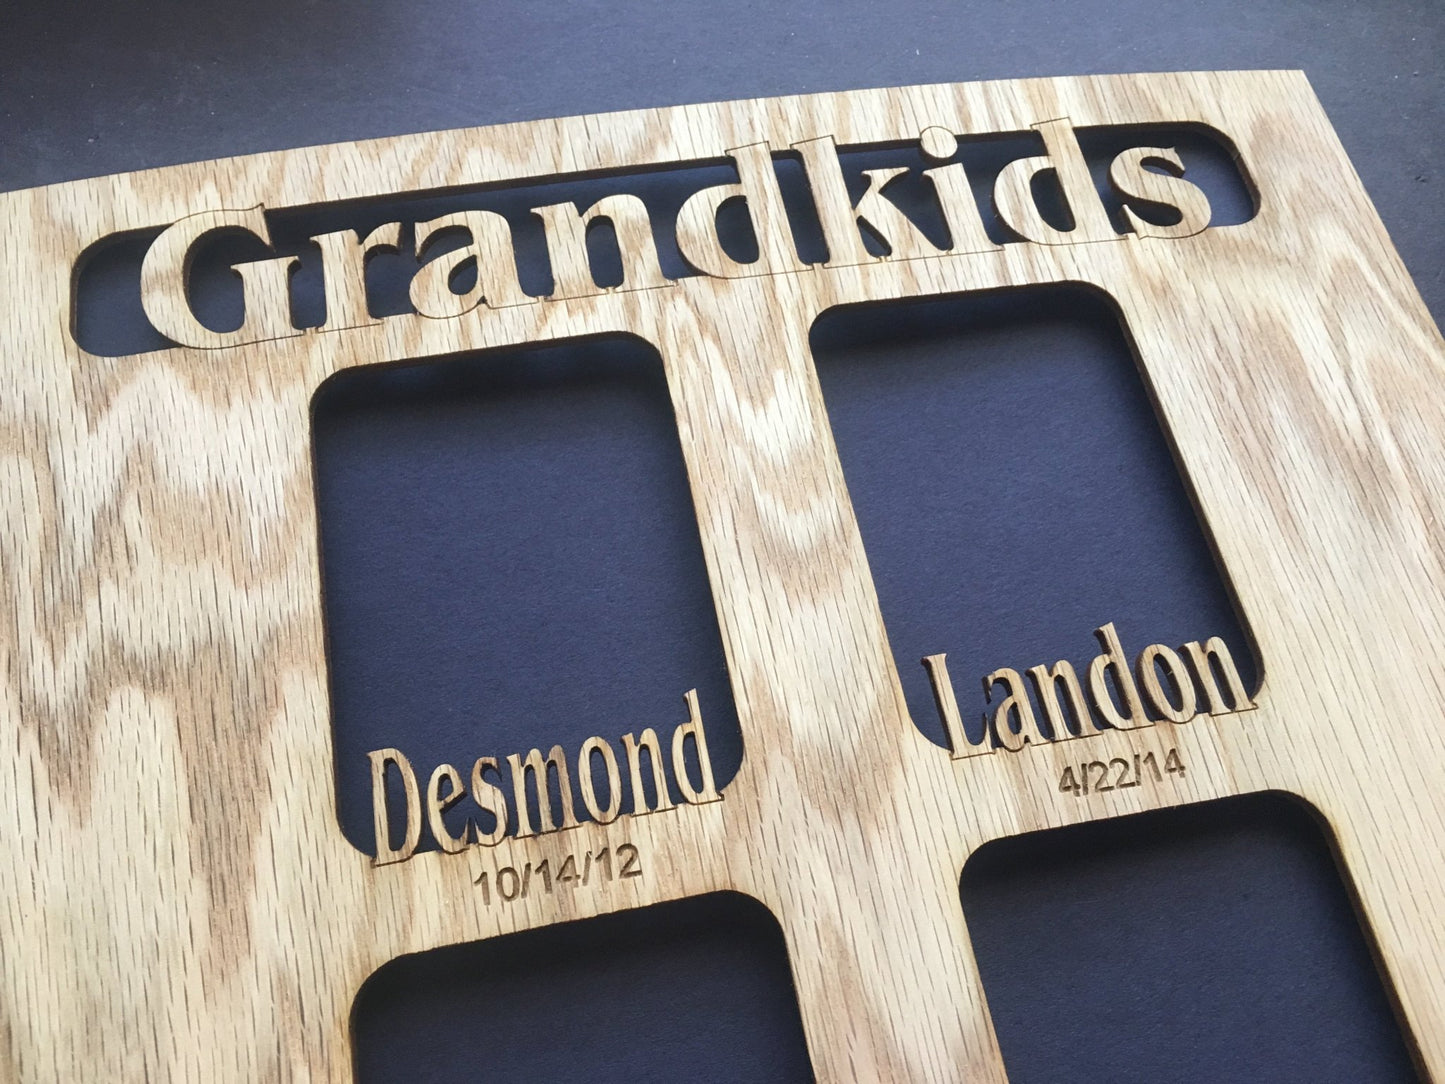 Grandkids Name Picture Frame w/ Date - Legacy Images - Picture Frames